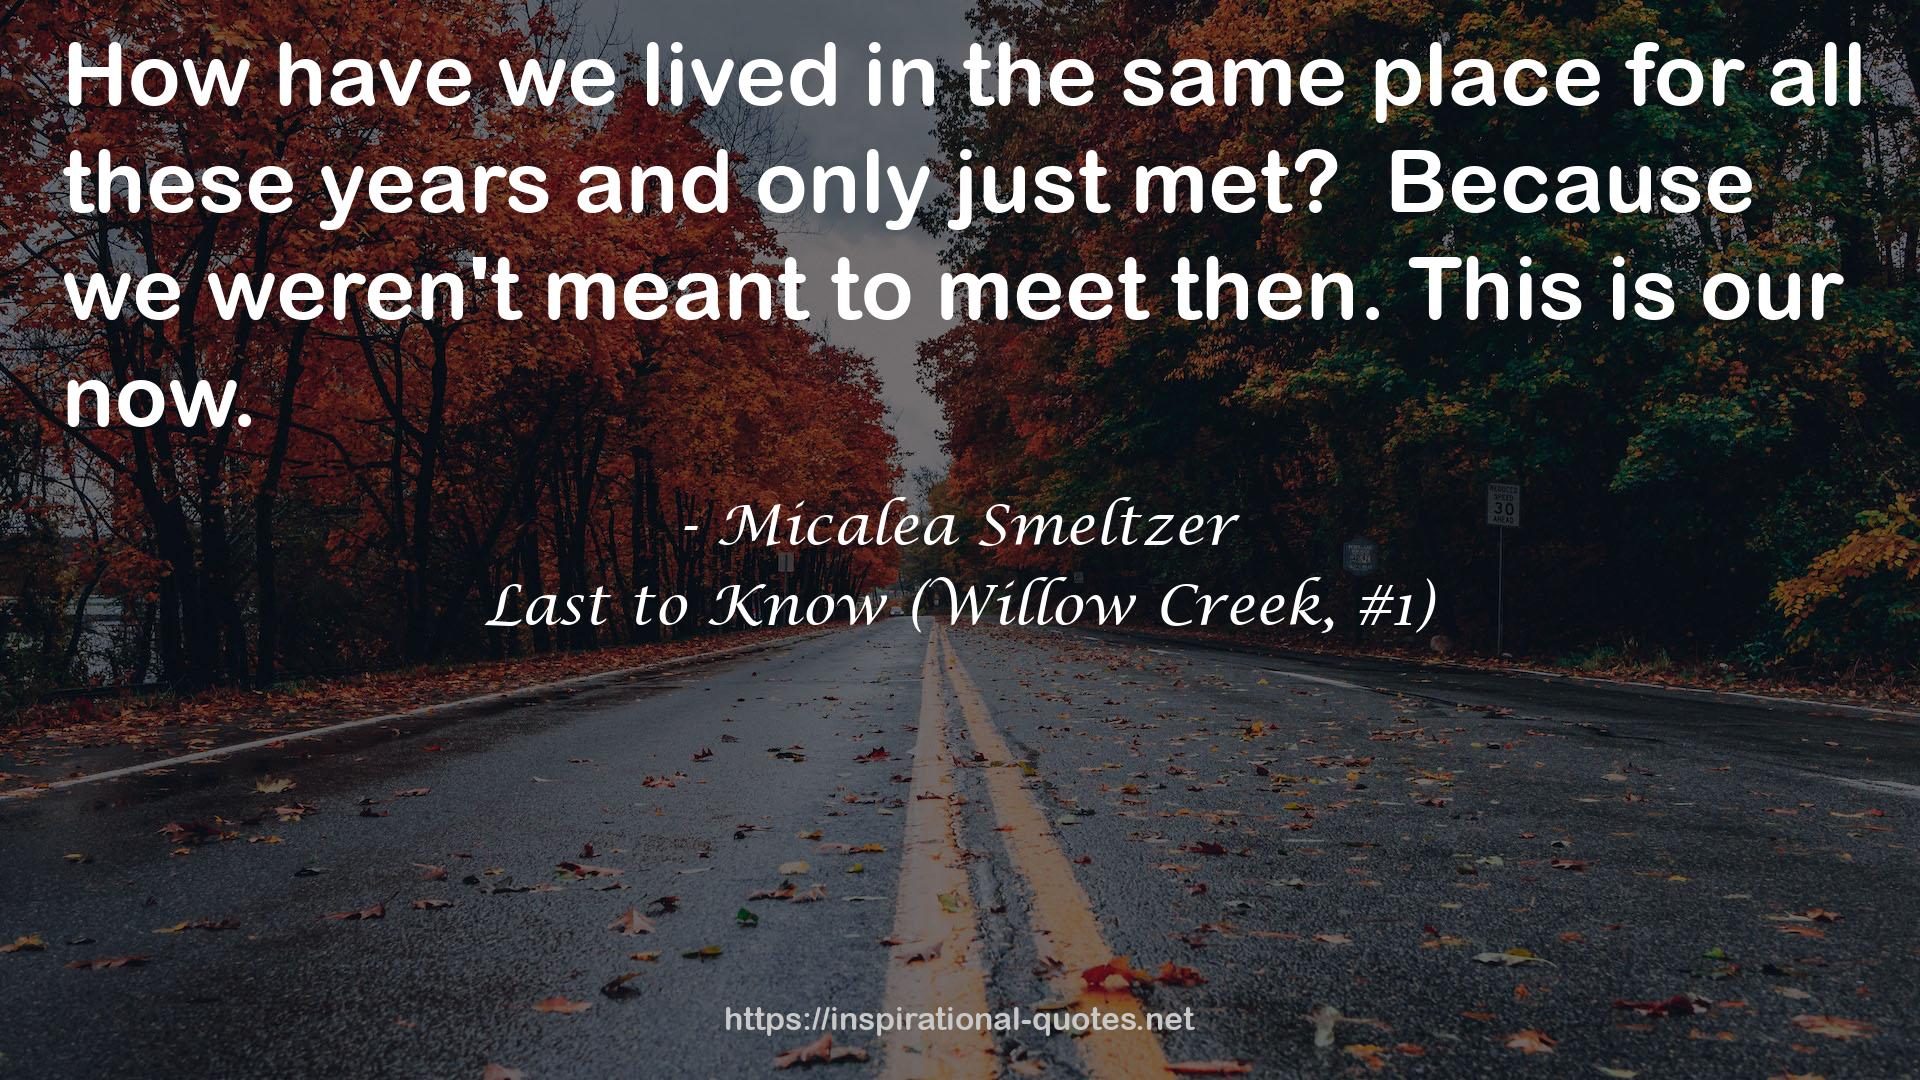 Last to Know (Willow Creek, #1) QUOTES